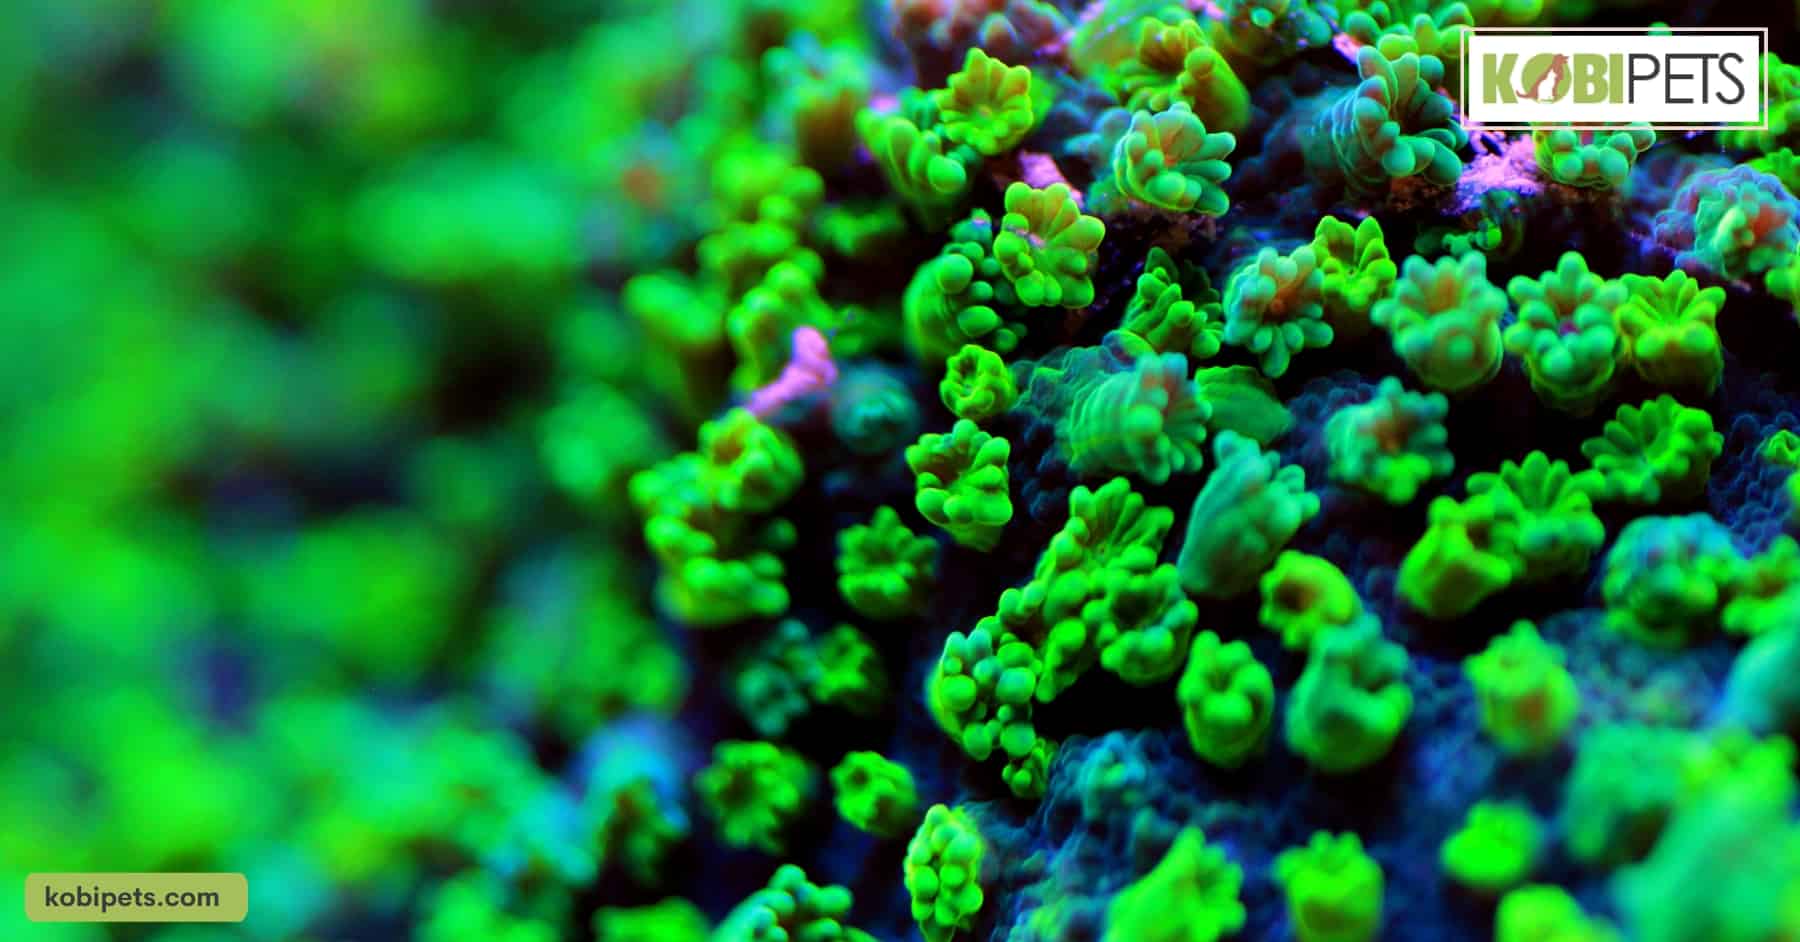 SPS (Small Polyp Stony) Corals